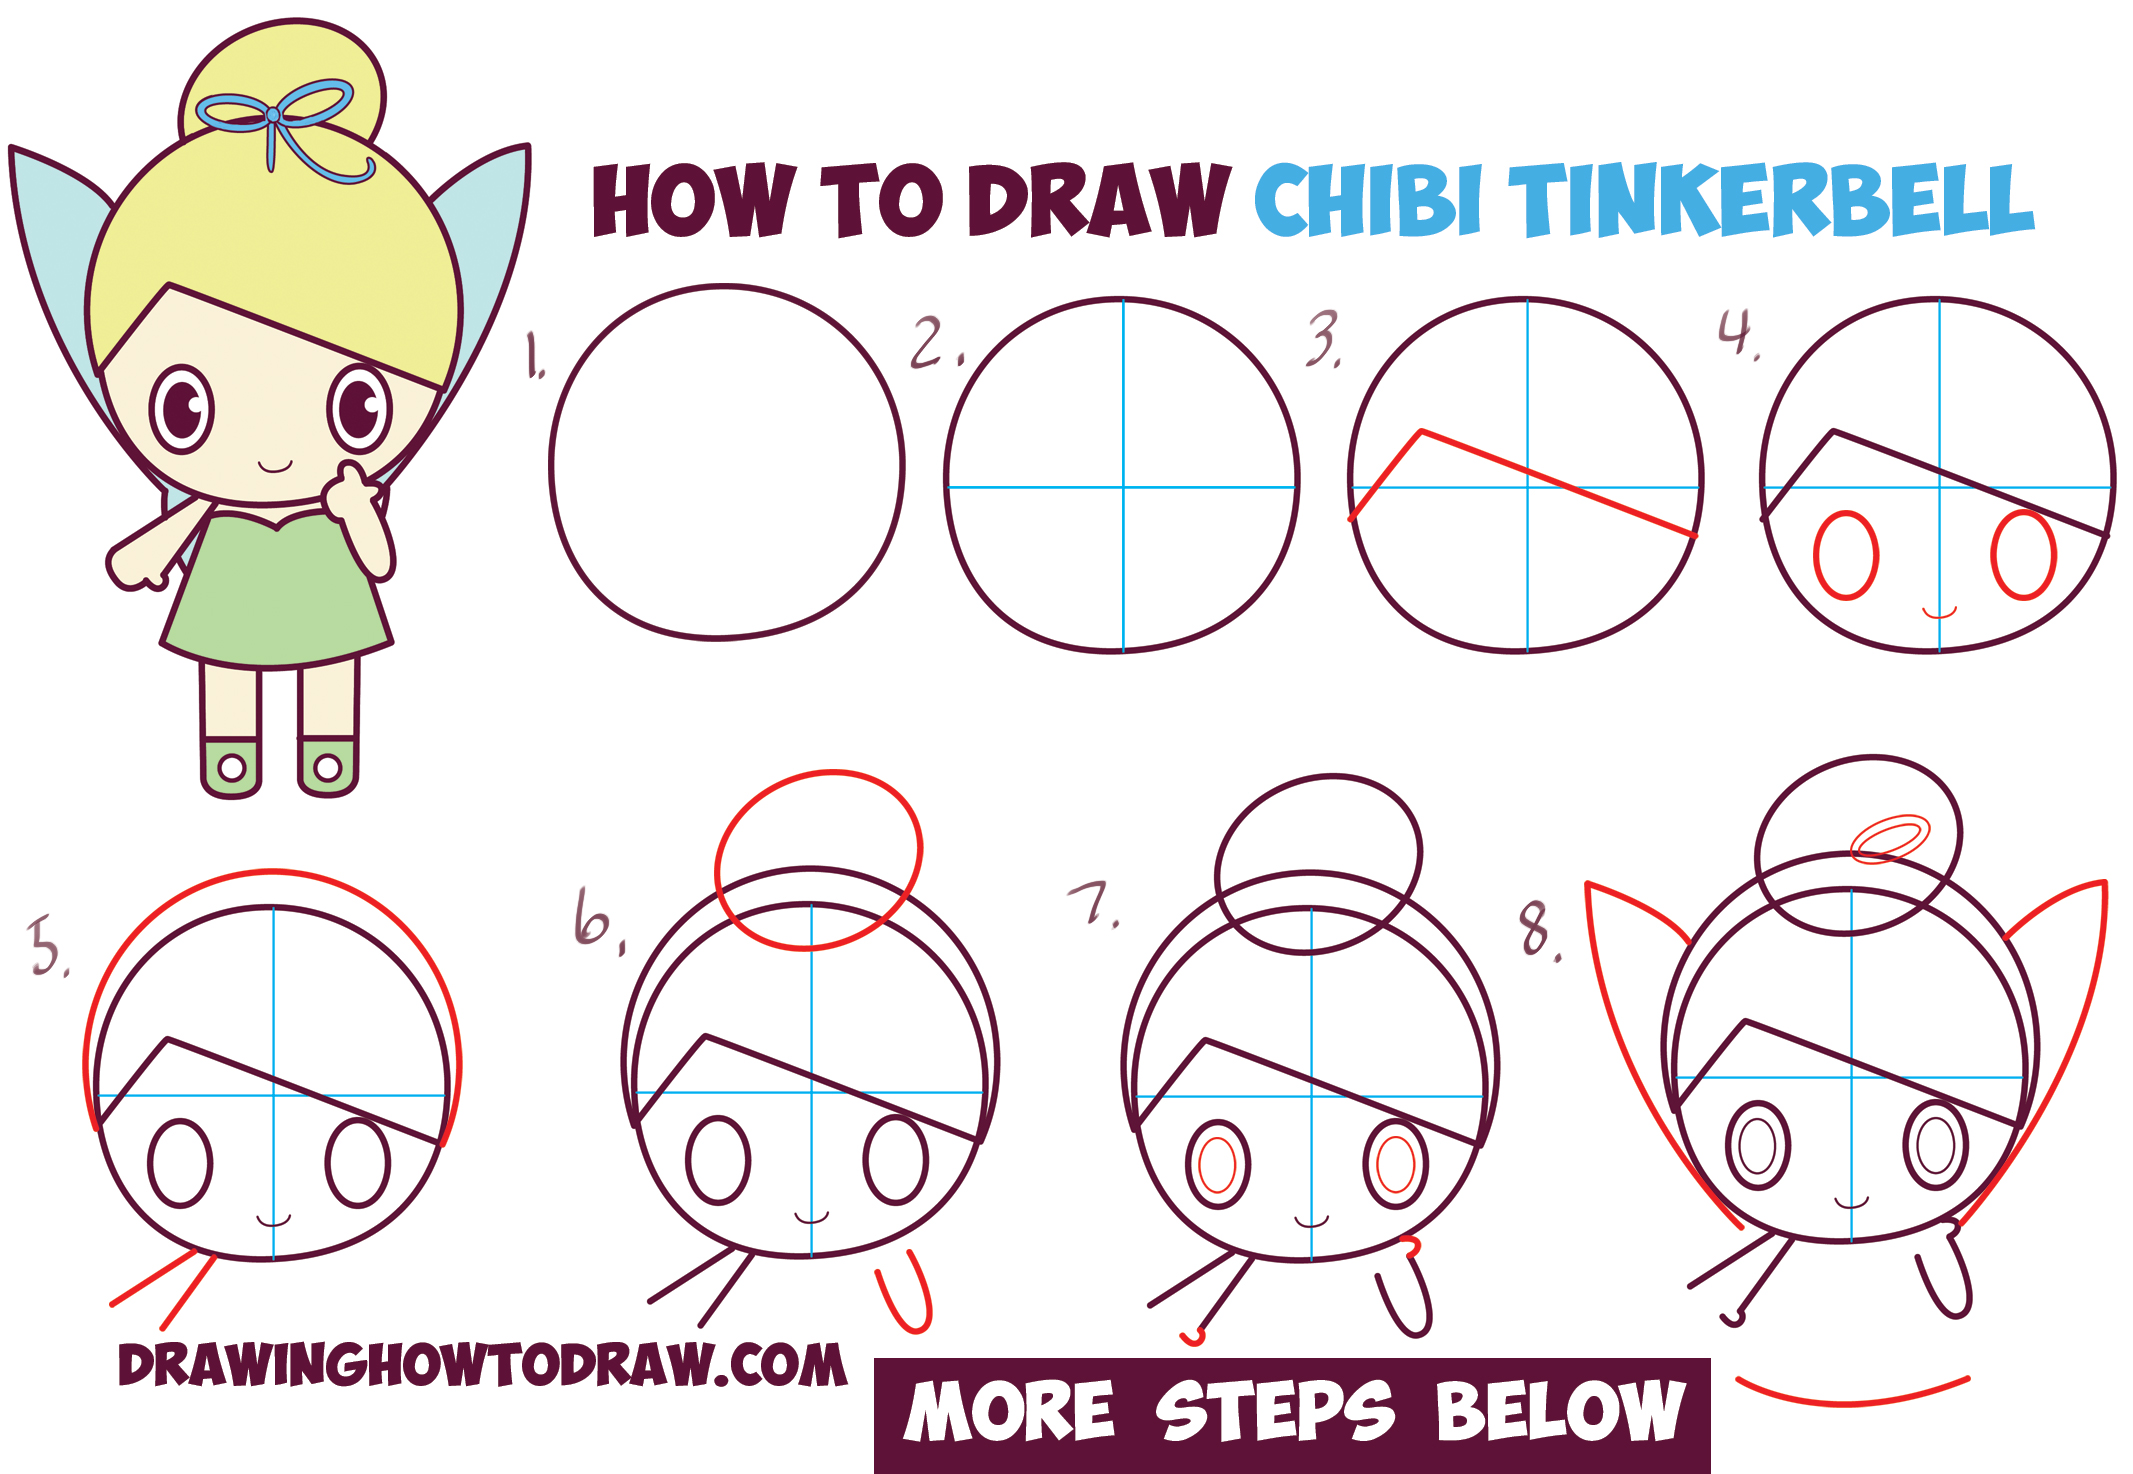 How to Draw Chibi Tinkerbell the Disney Fairy in Easy Step by Step